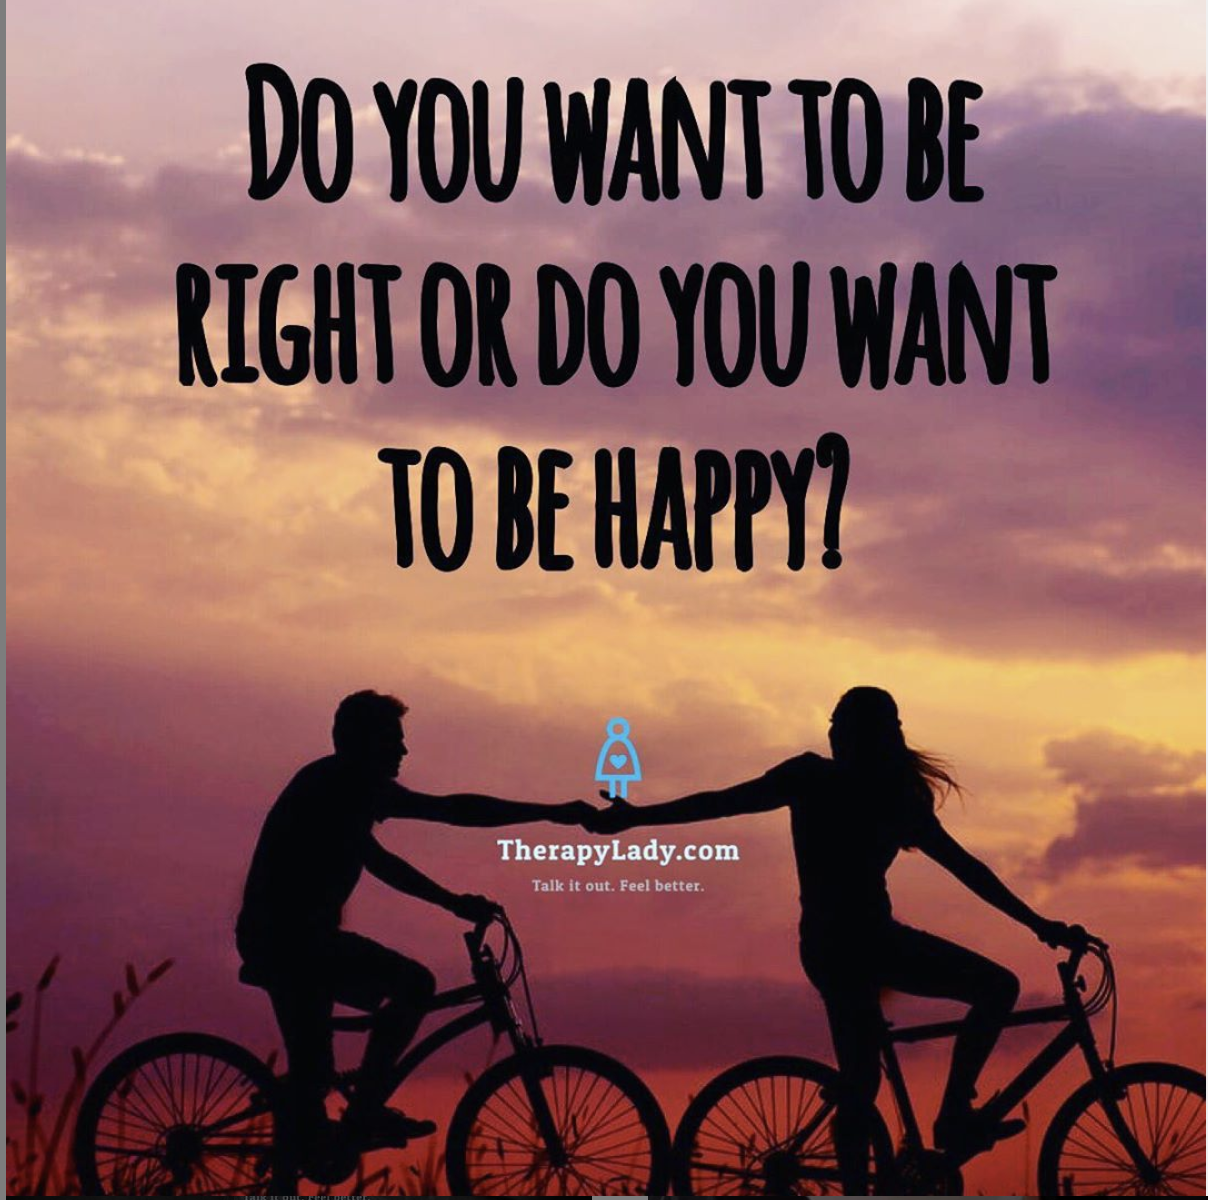 Whether you want. Do you want to be my friend?. I want you to be Happy. Do you want be right or Happy. You want to be.